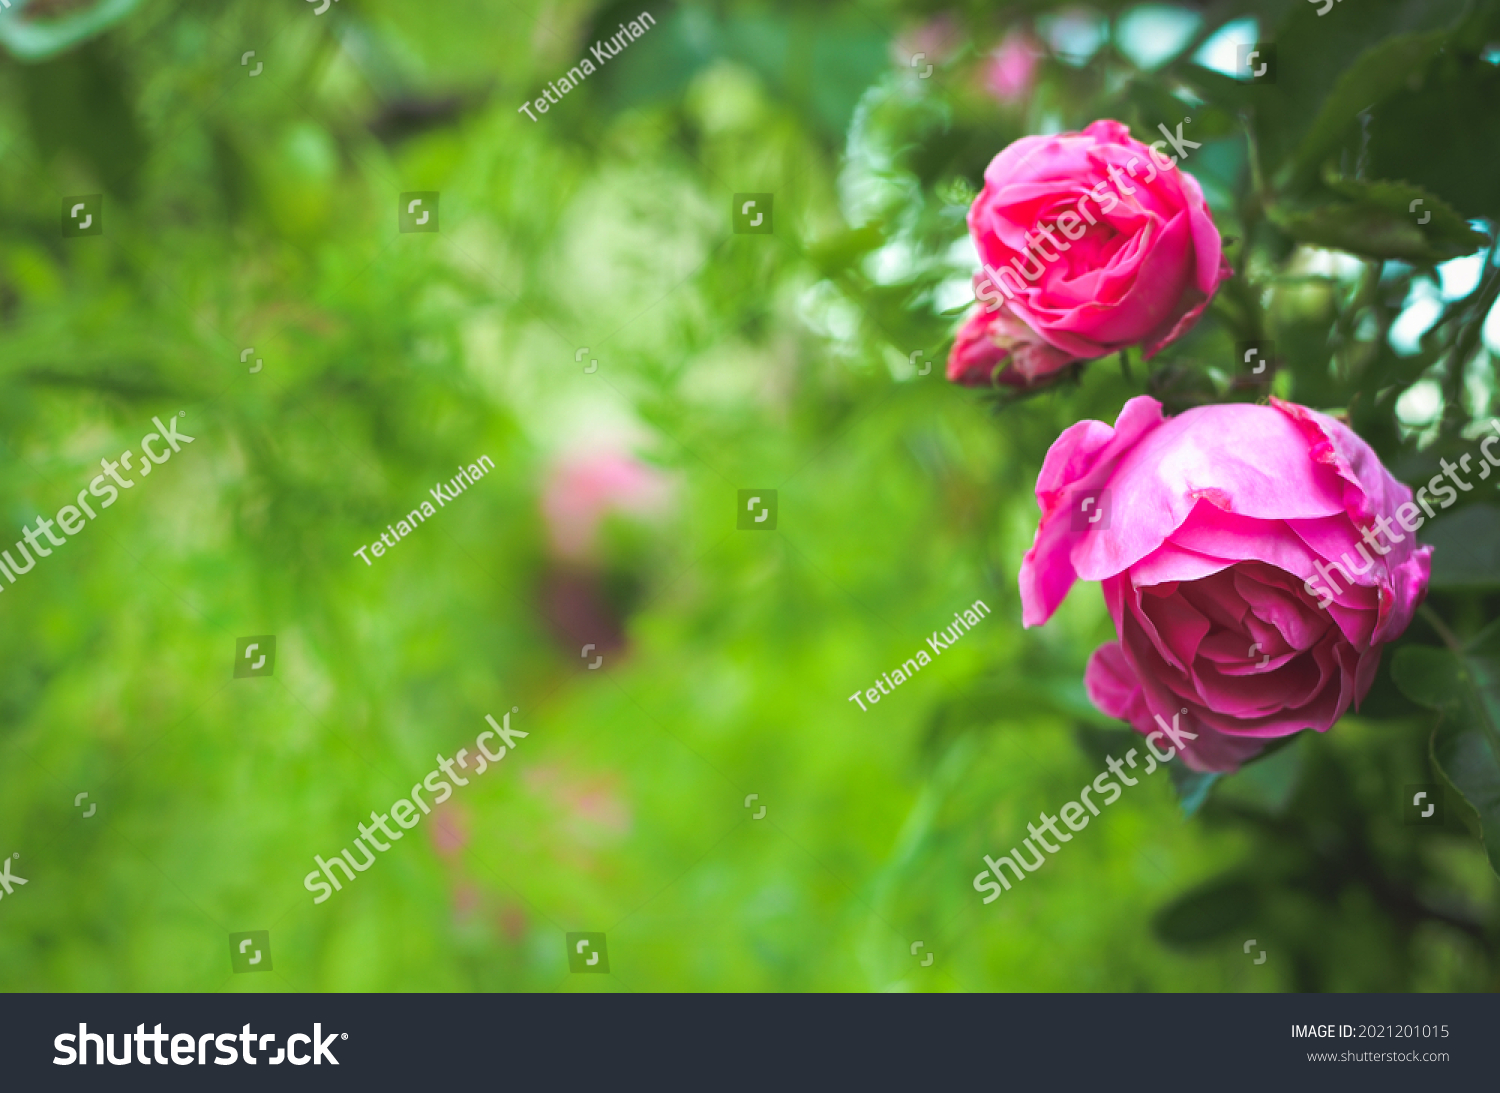 concept, garden and rosebush with pink roses, with blurred foreground #2021201015